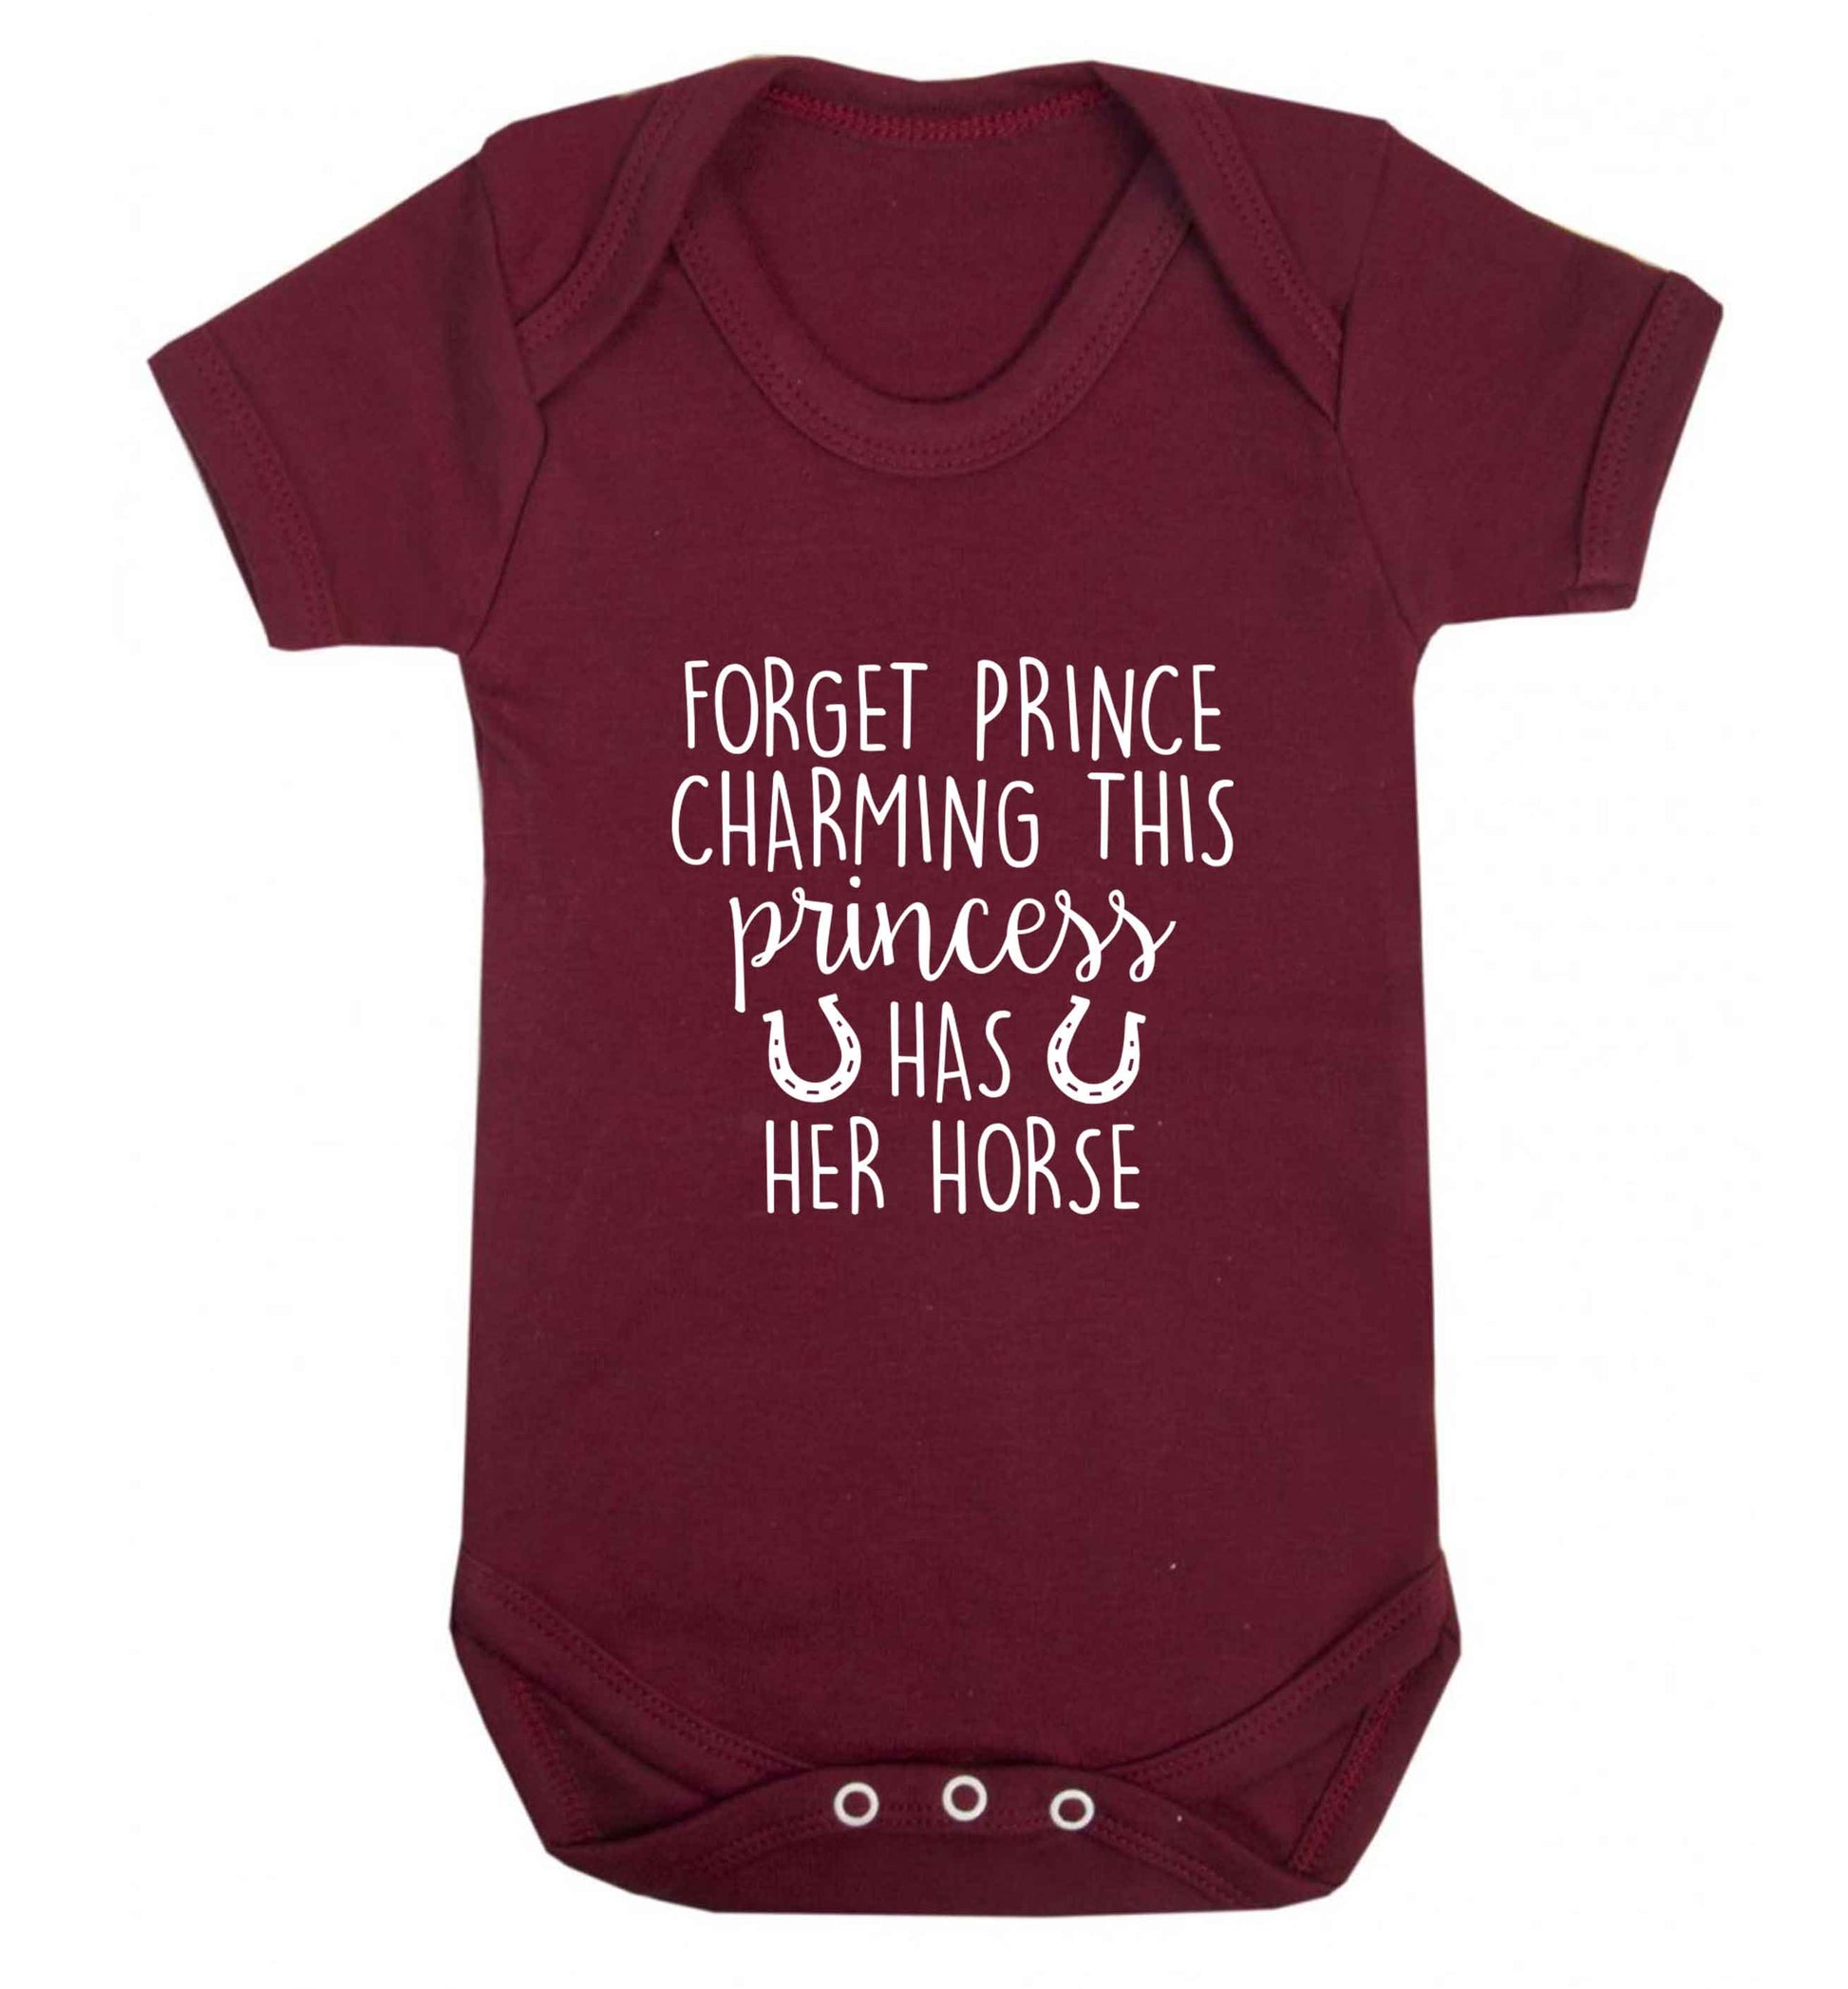 Forget prince charming this princess has her horse baby vest maroon 18-24 months